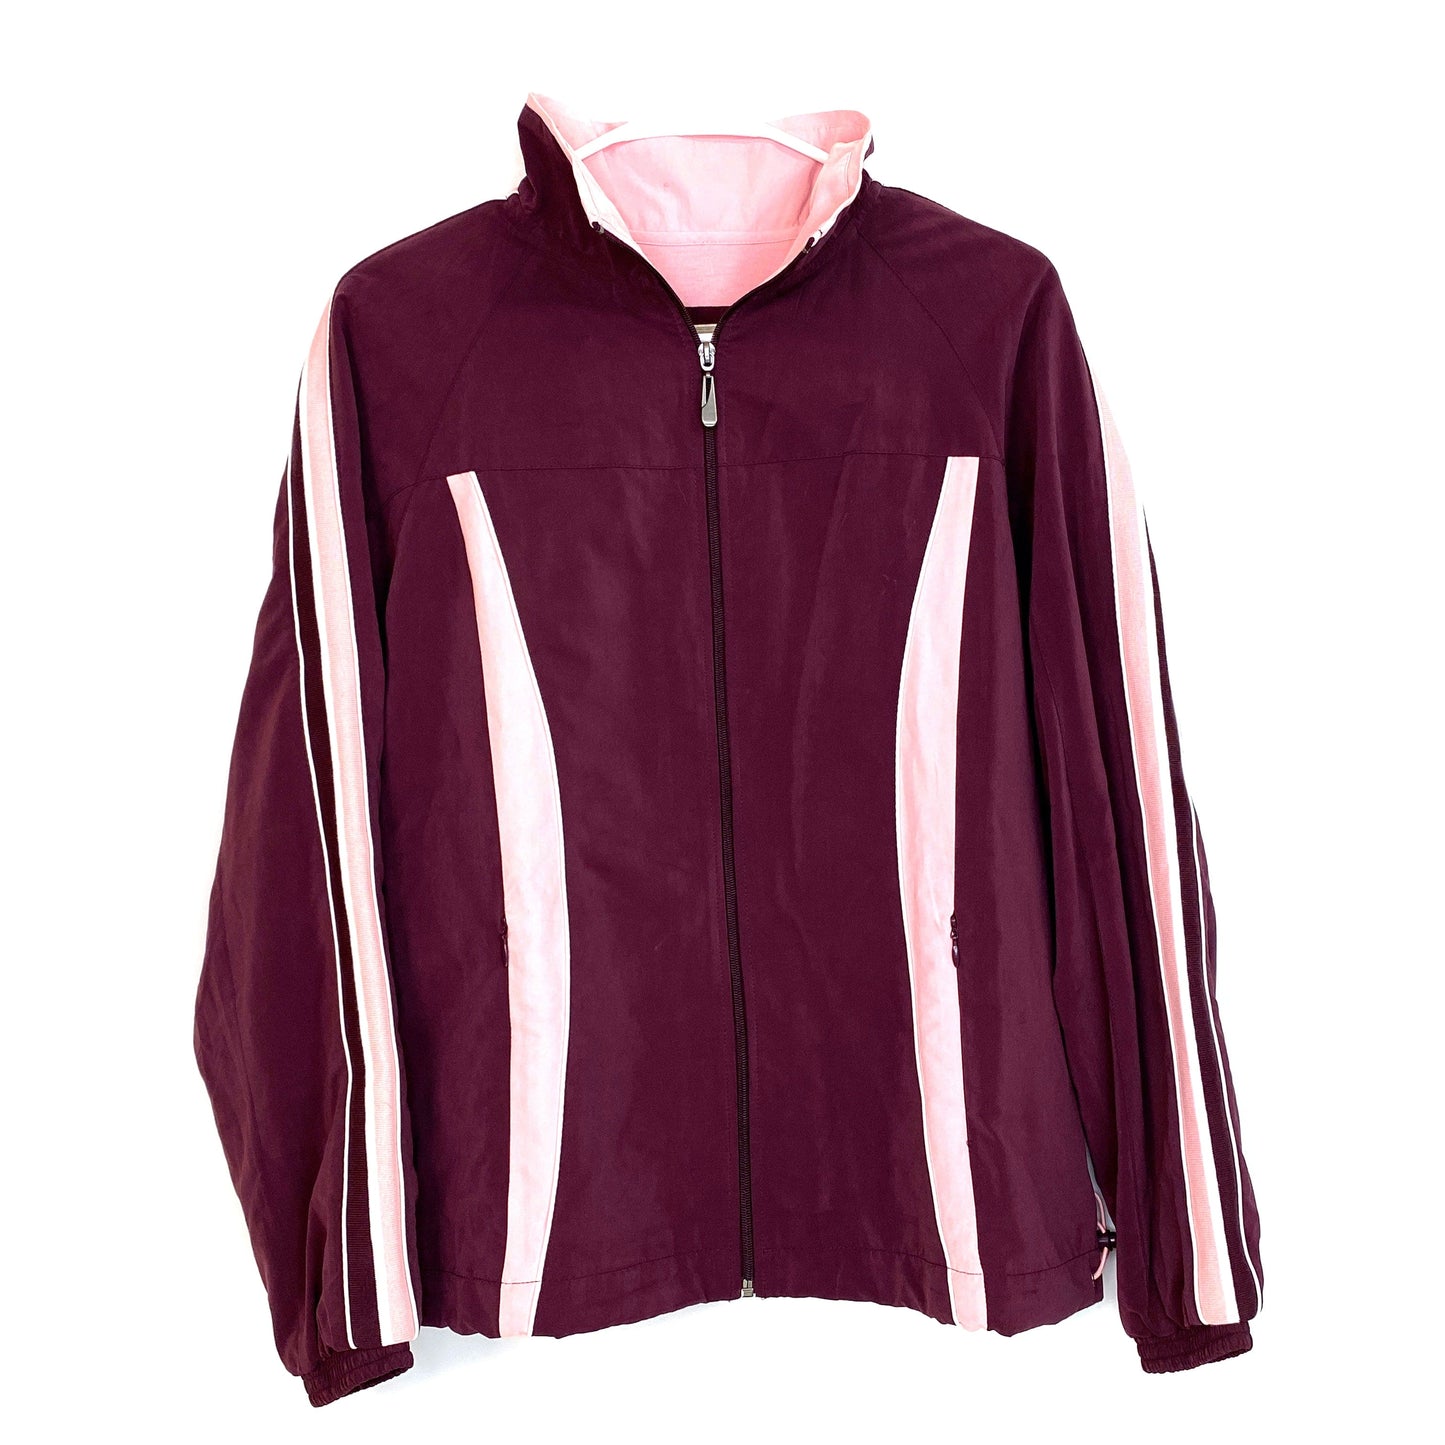 Green Tea Womens Athletic Jacket Size M Burgundy Pink Full Zup Colorblock L/s